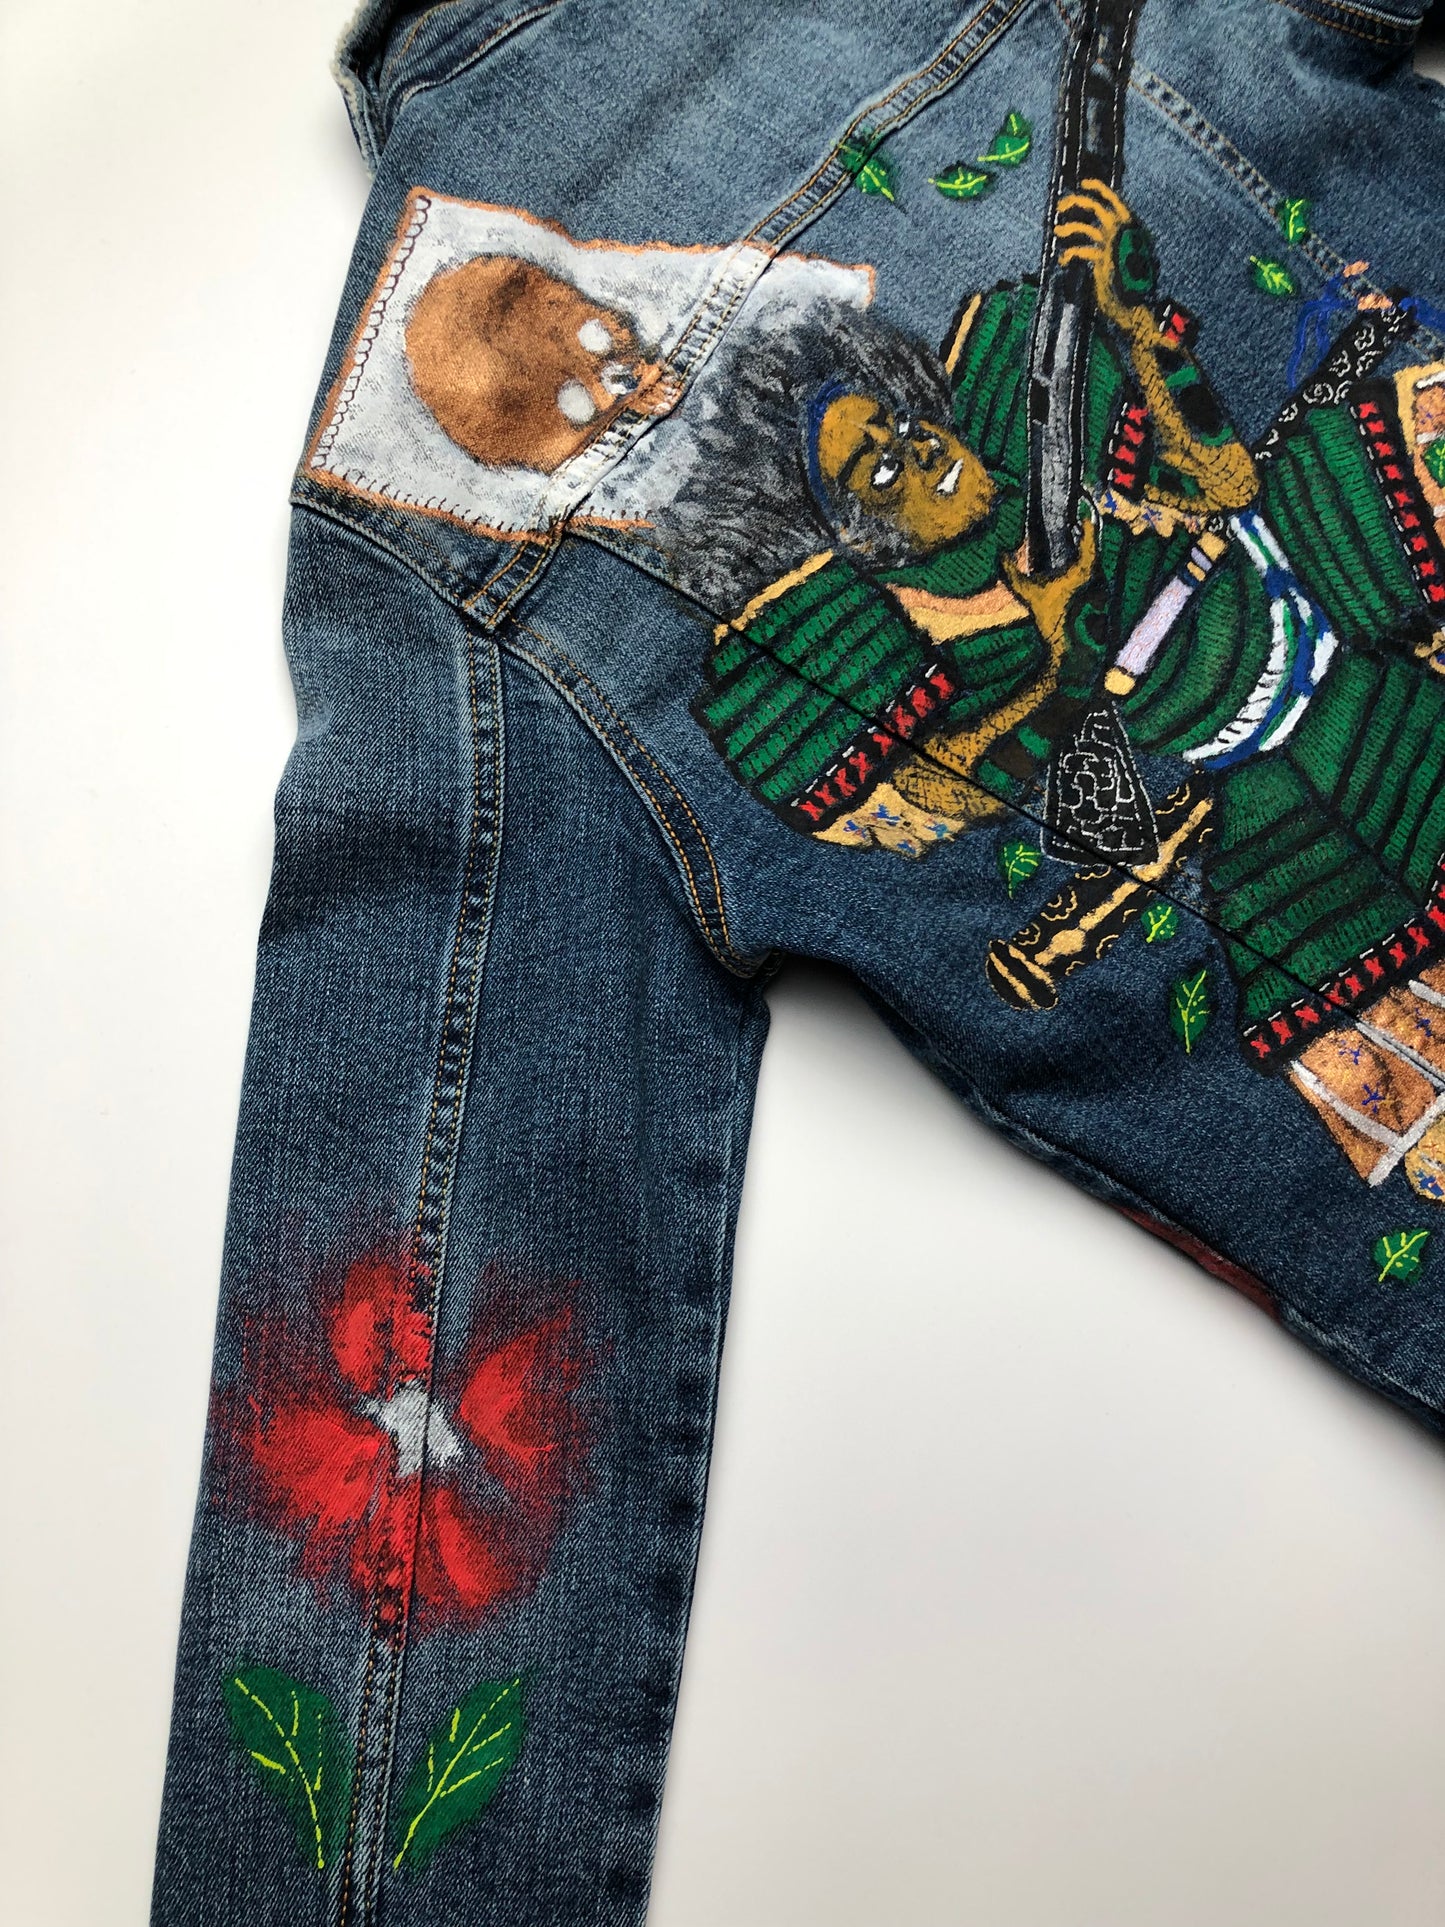 Details on the back of the Japanese warrior denim jacket and flower patterns on the sleeve